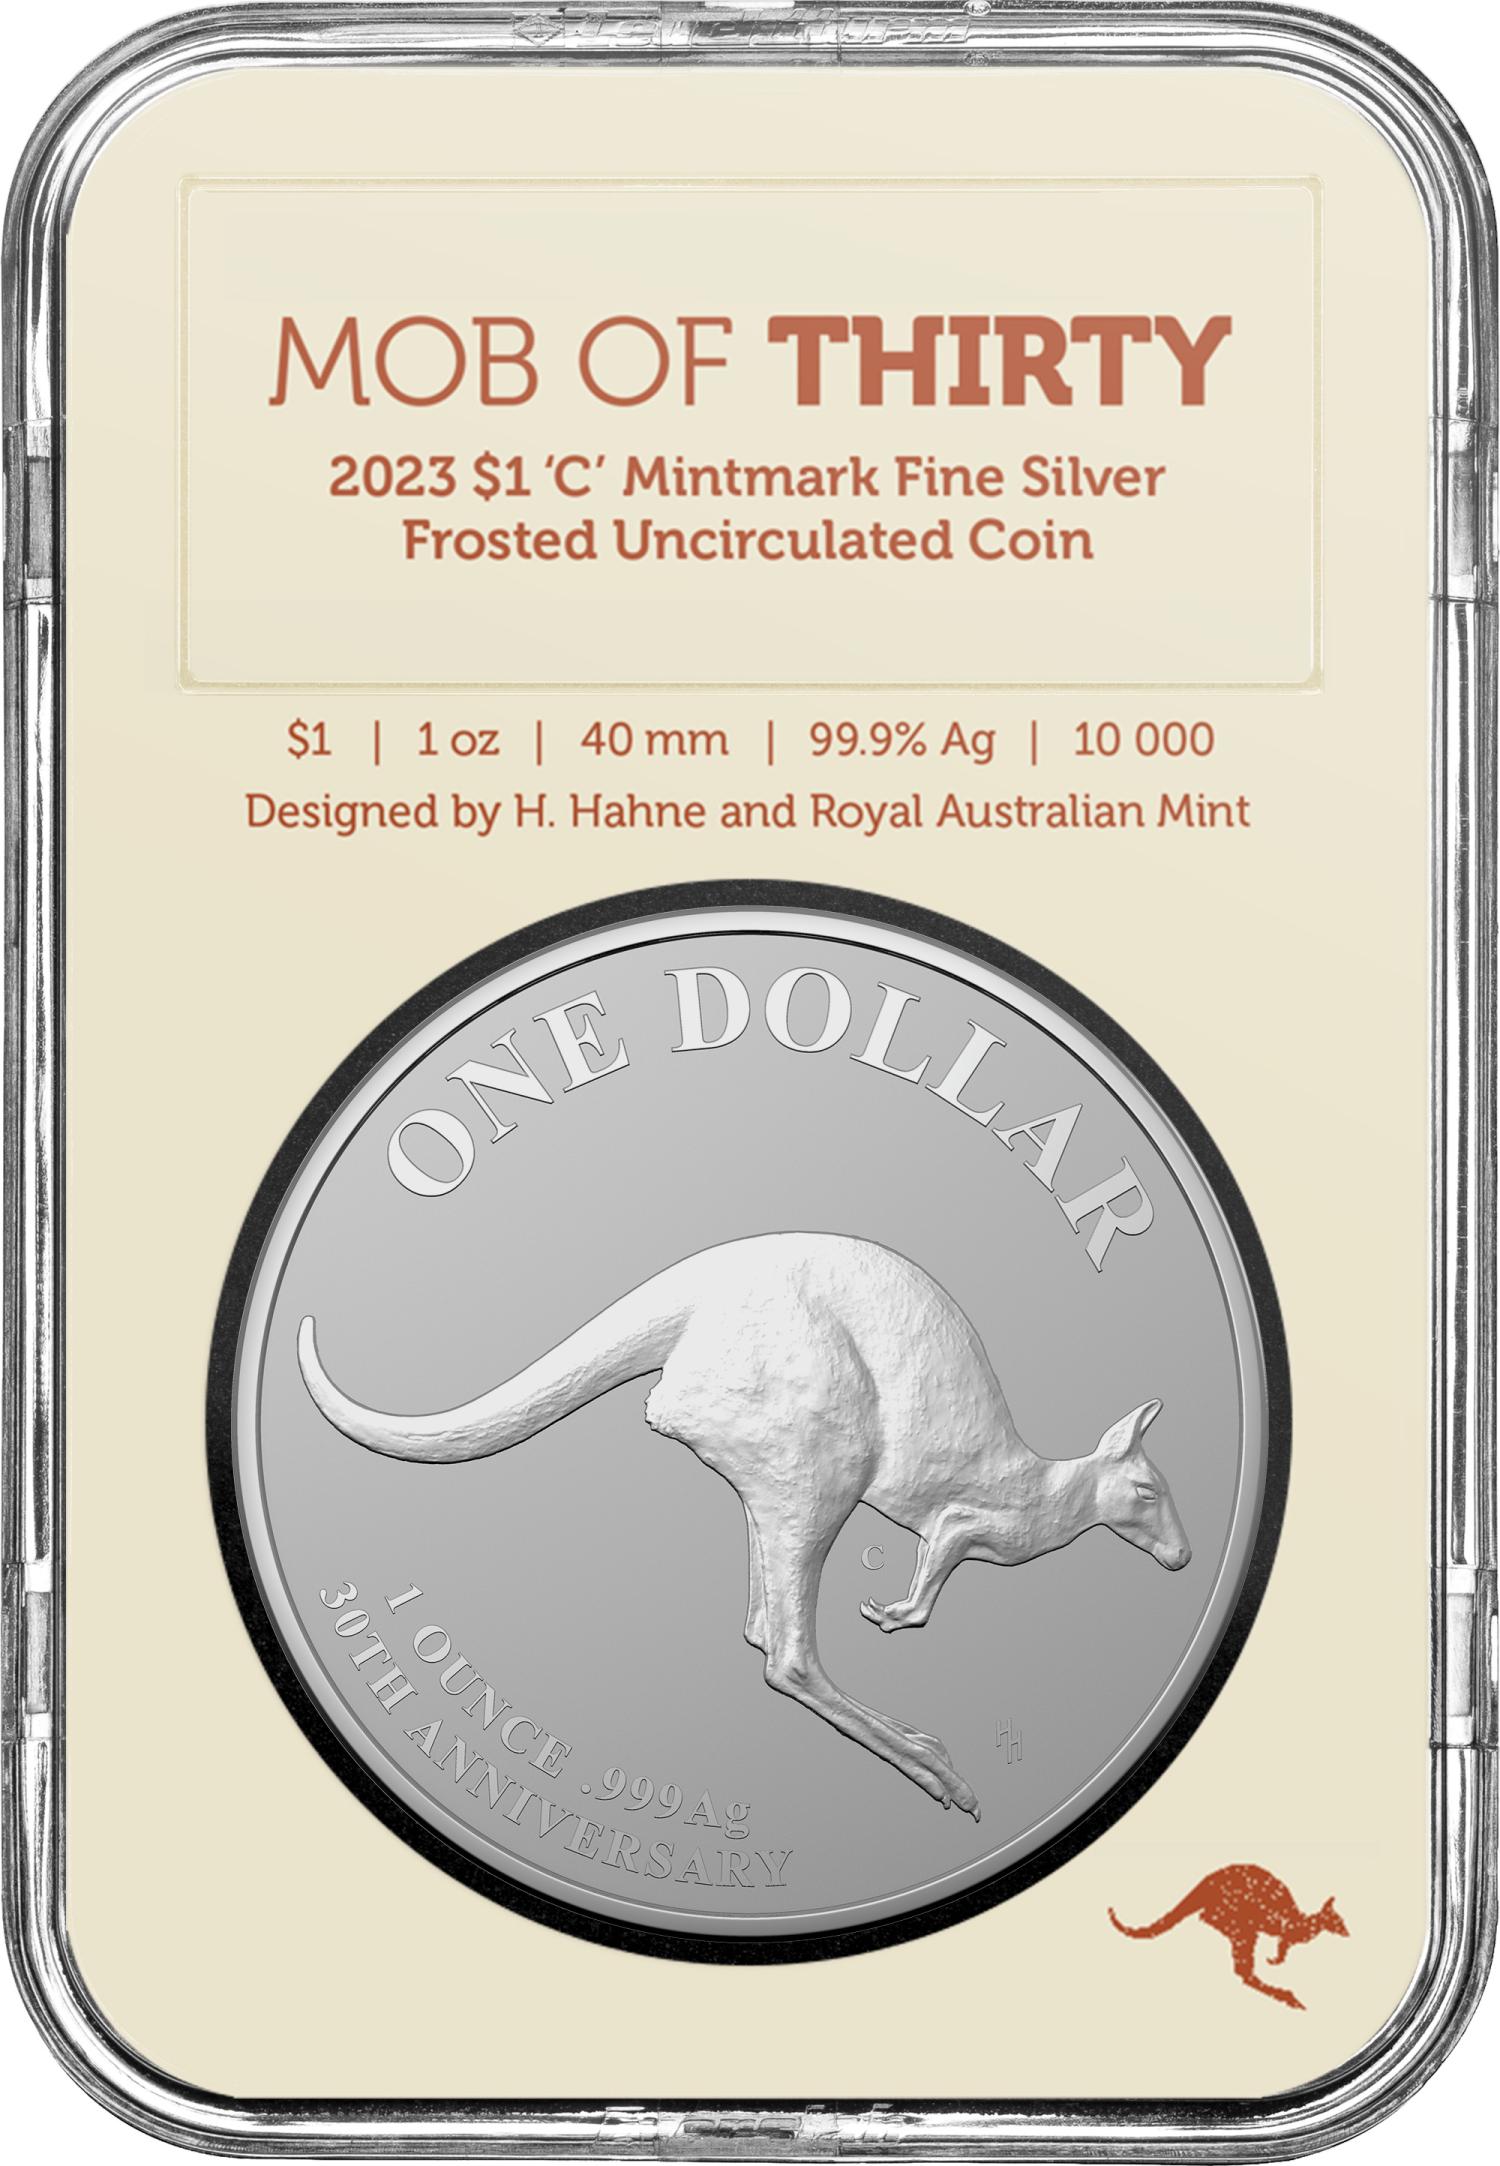 Thumbnail for 2023 $1 30th Anniversary of the Kangaroo Series - Mob of Thirty 1oz Fine Silver 'C' FROSTED UNC in Presentation Case